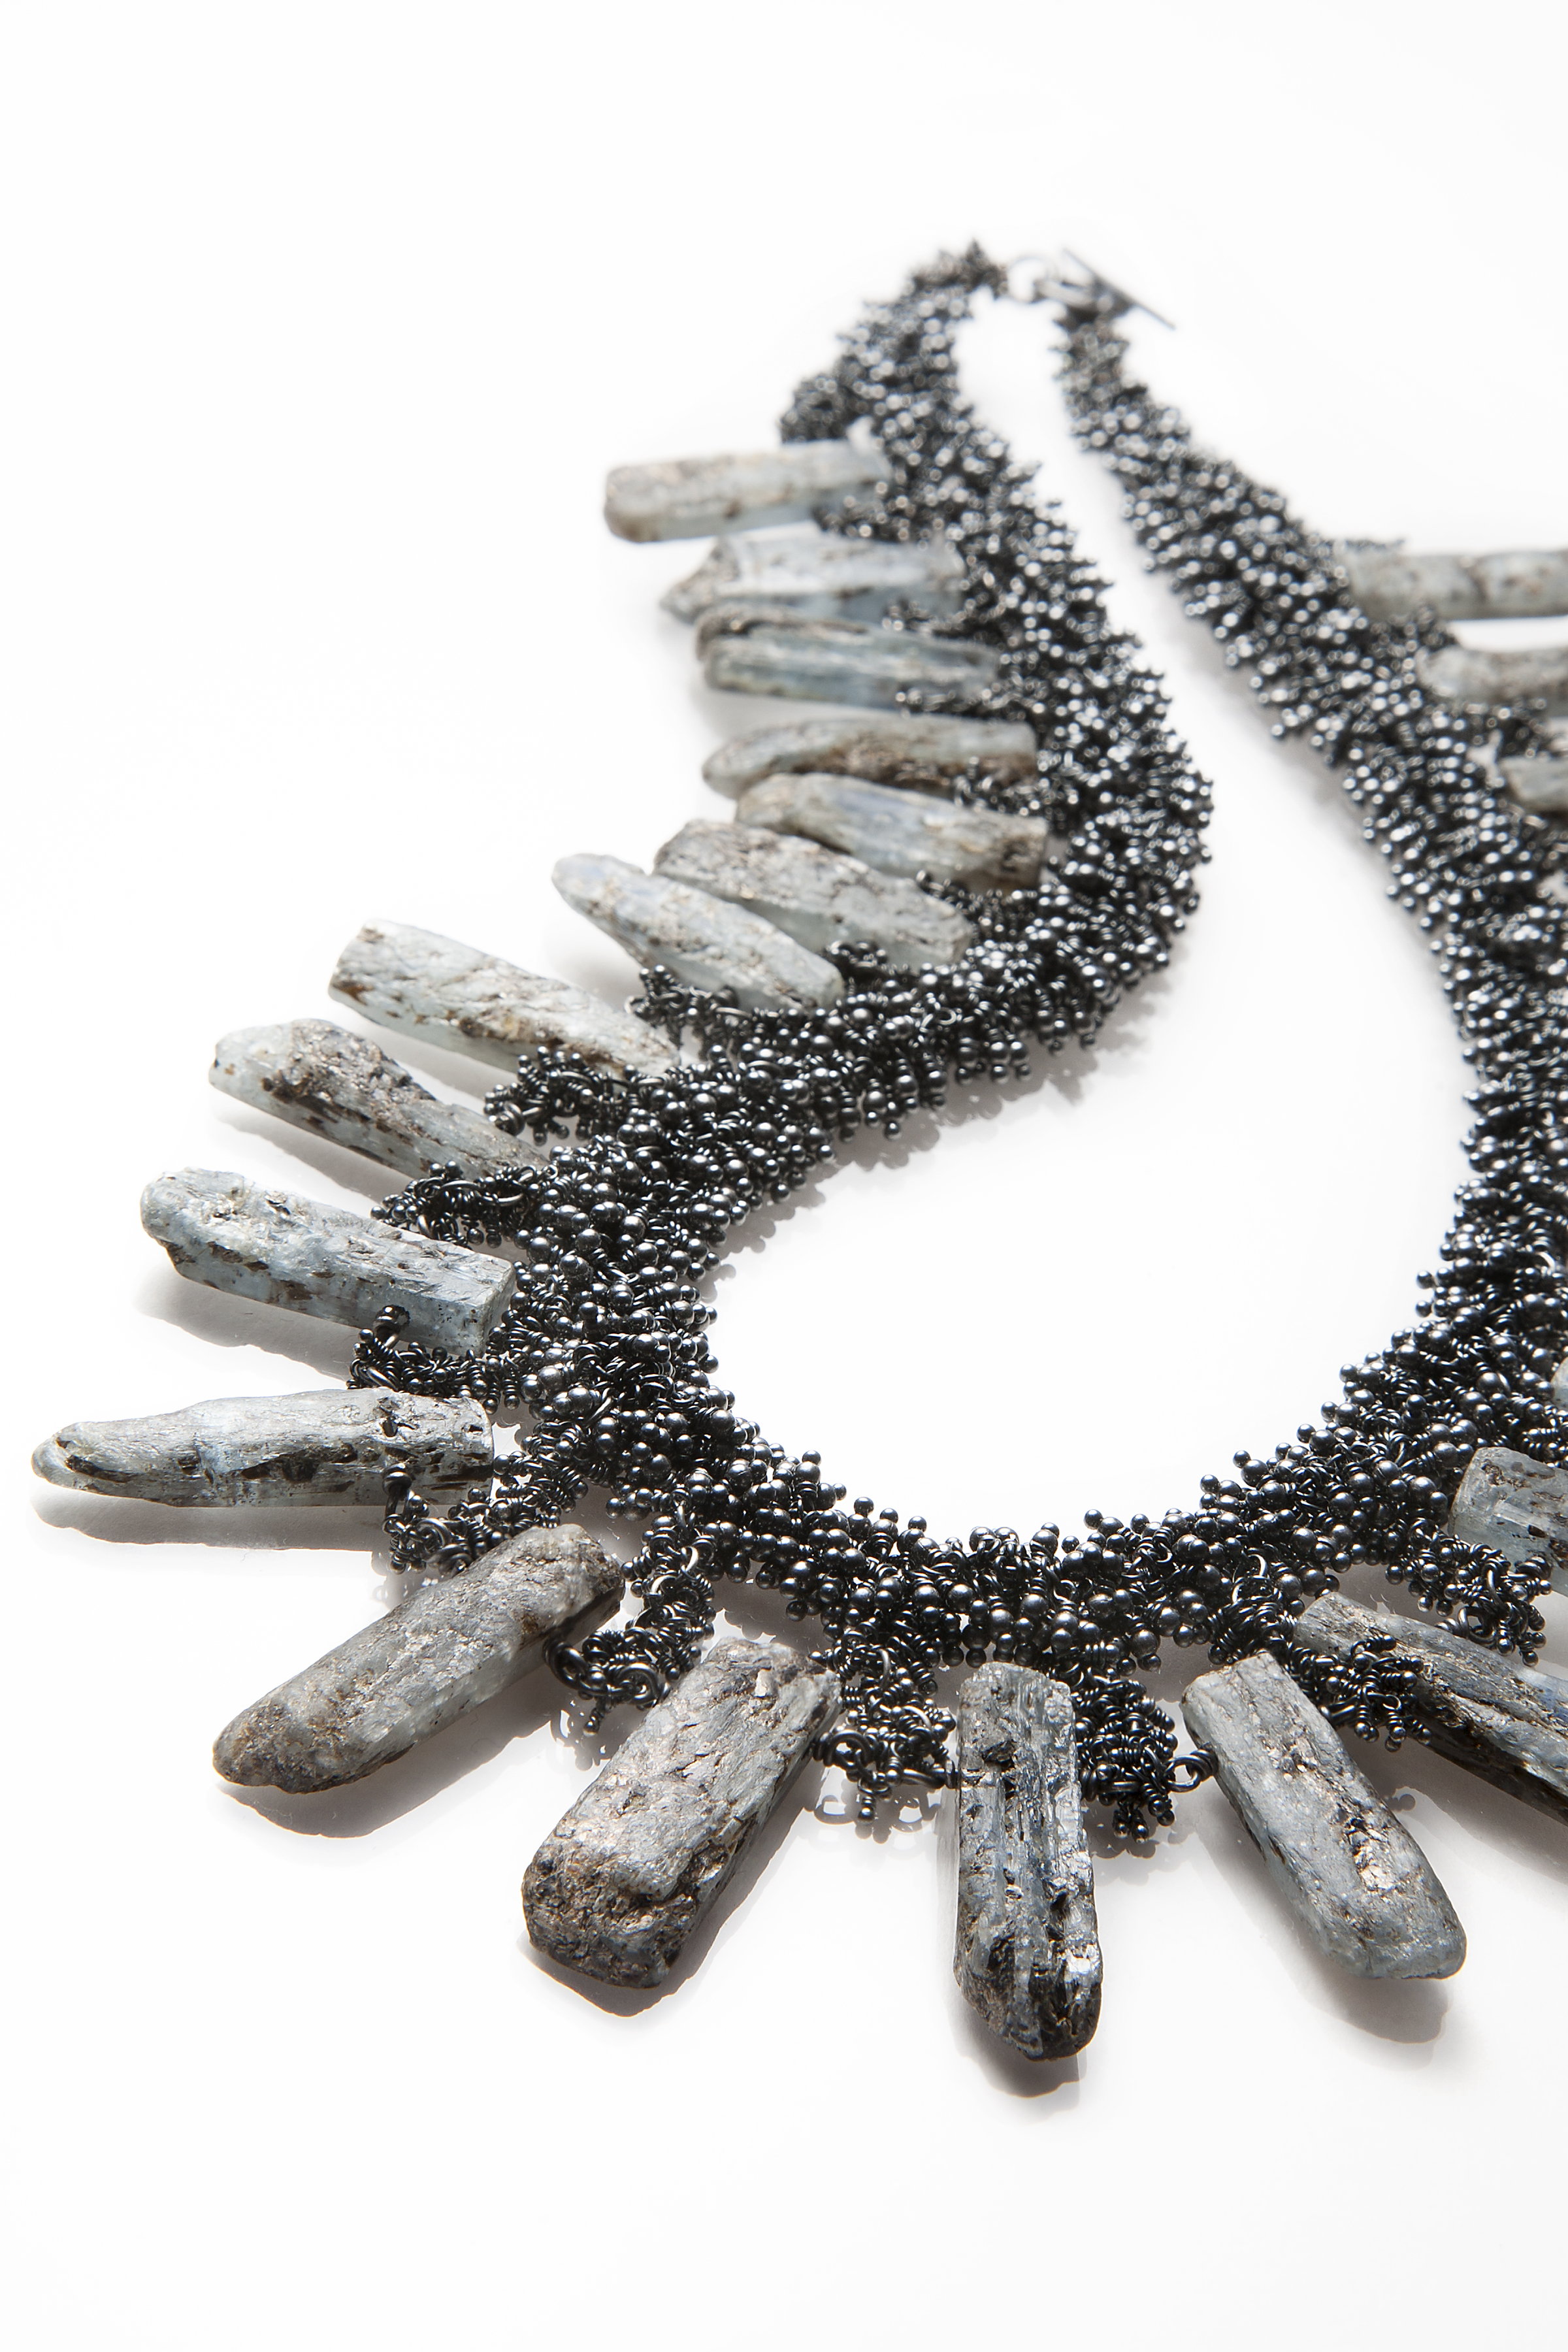 Michelle Pajak-Reynolds Undina Collection Nimue necklace